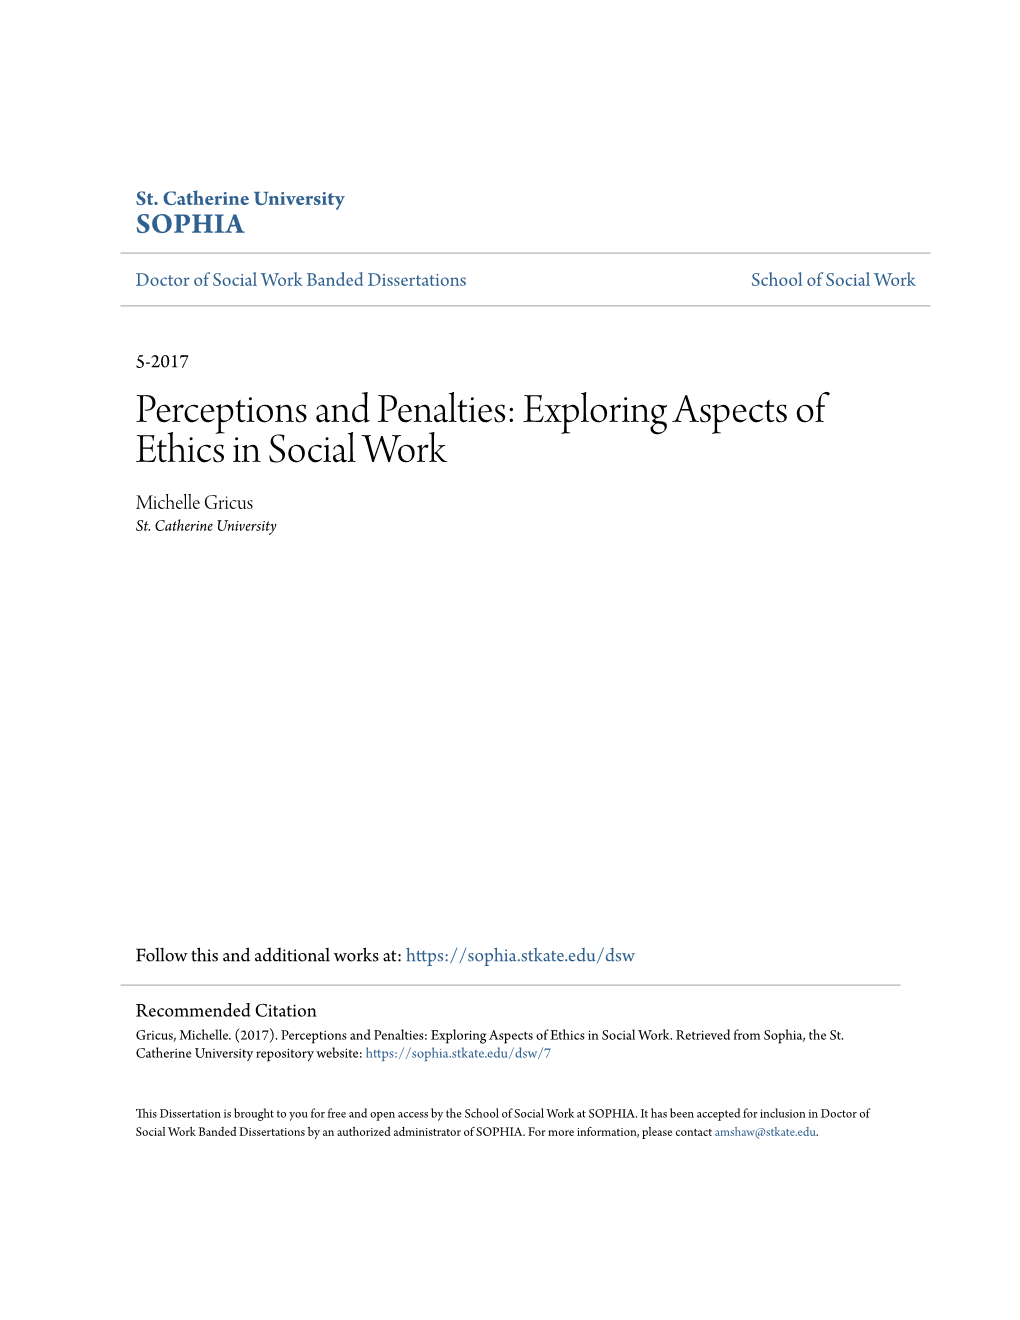 Perceptions and Penalties: Exploring Aspects of Ethics in Social Work Michelle Gricus St